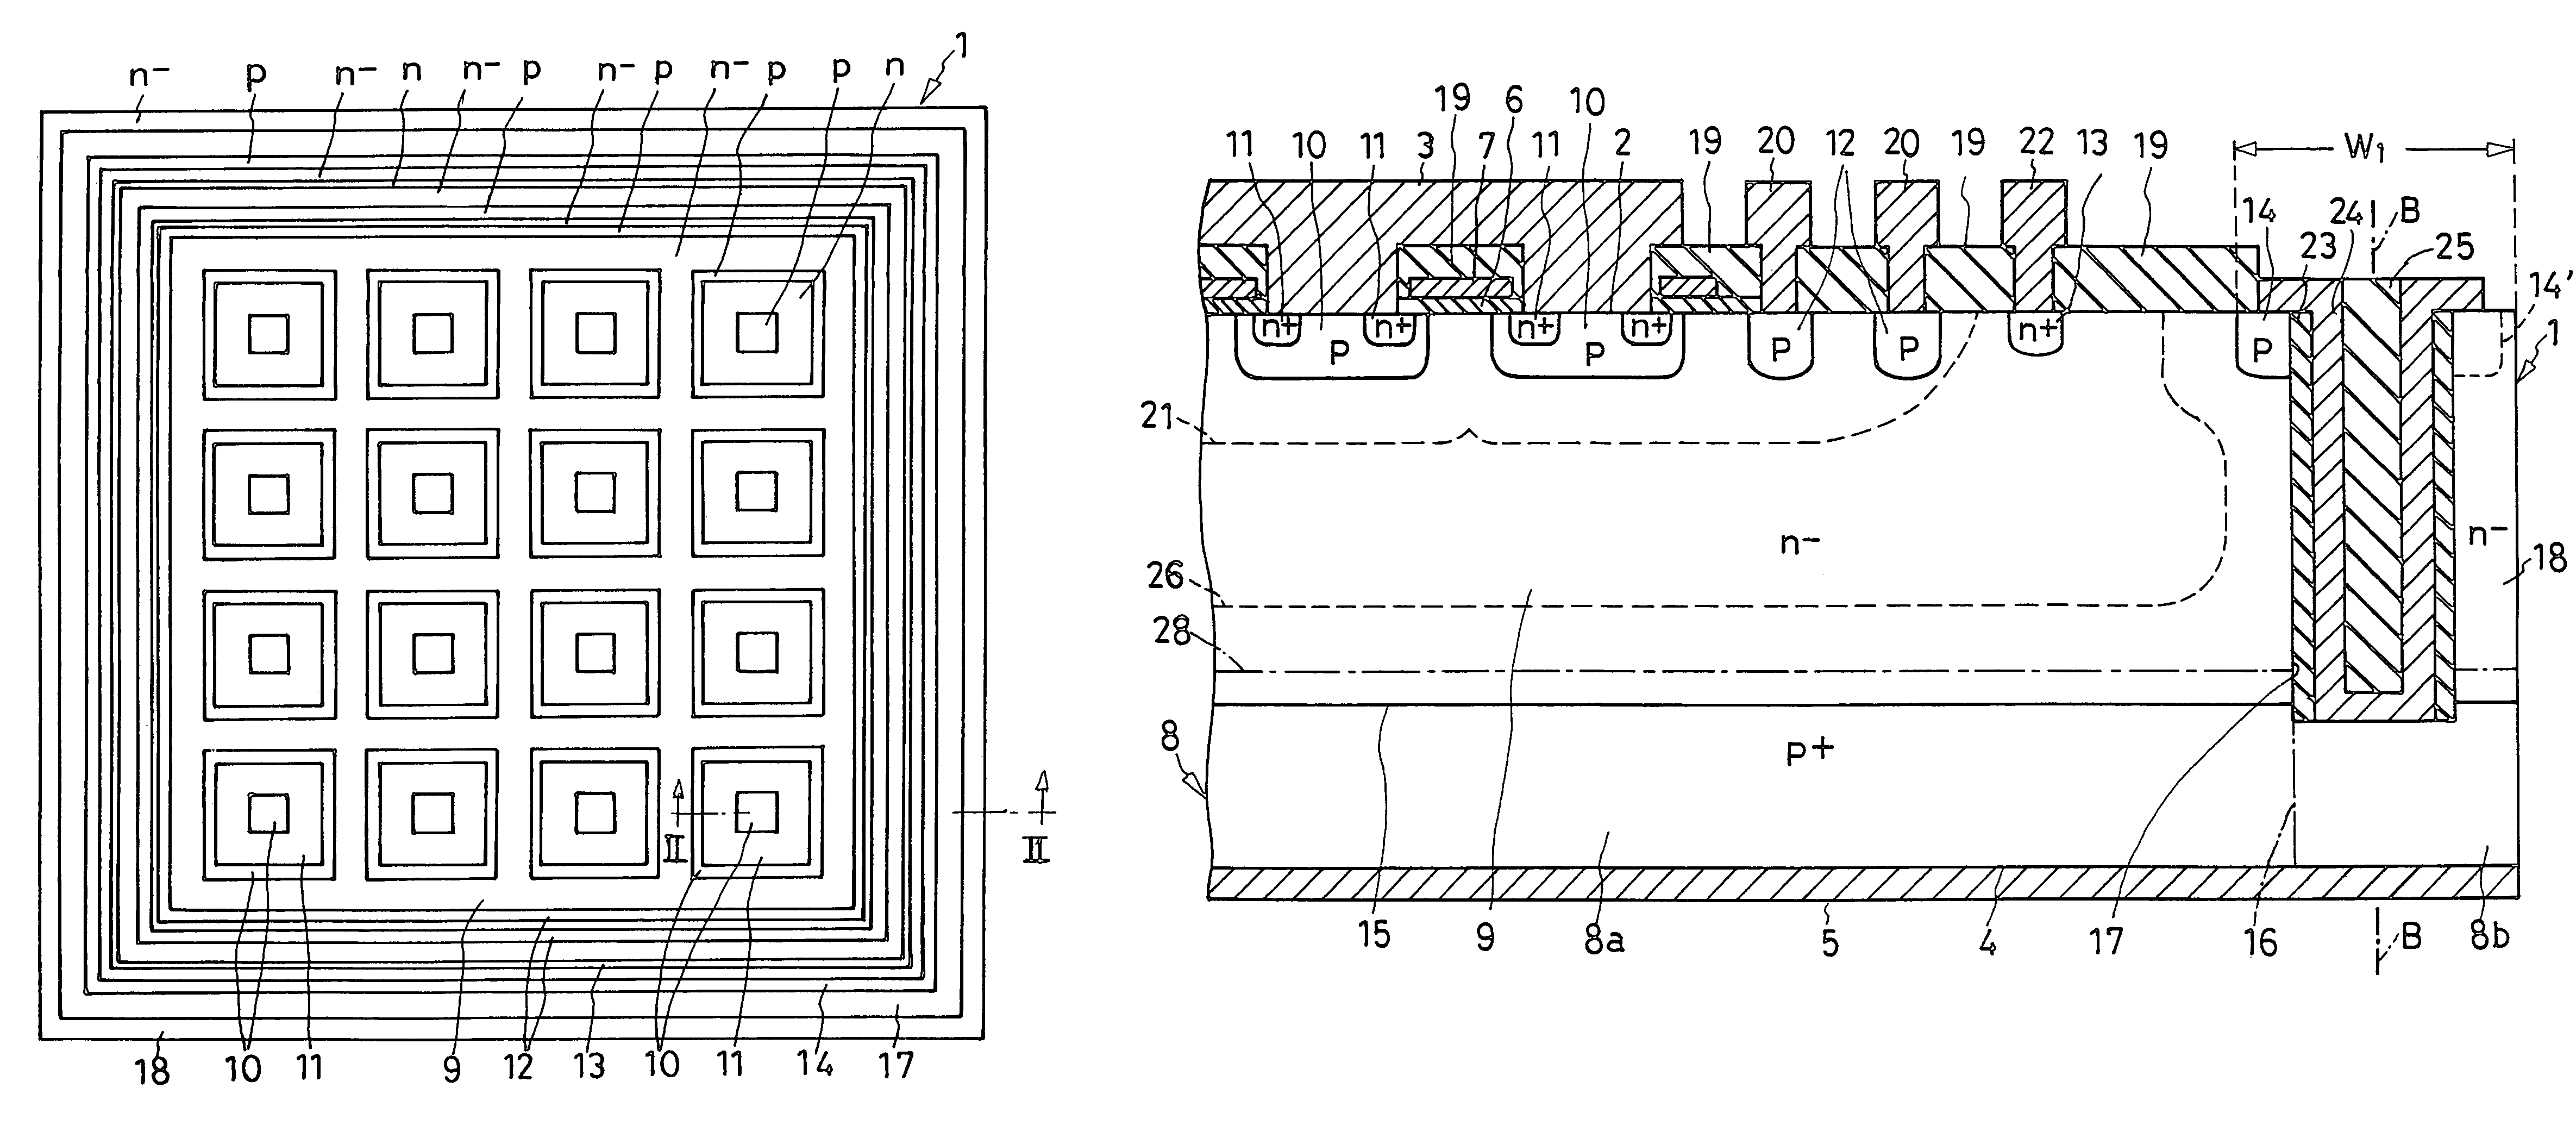 IGBT or like semiconductor device of high voltage-withstanding capability